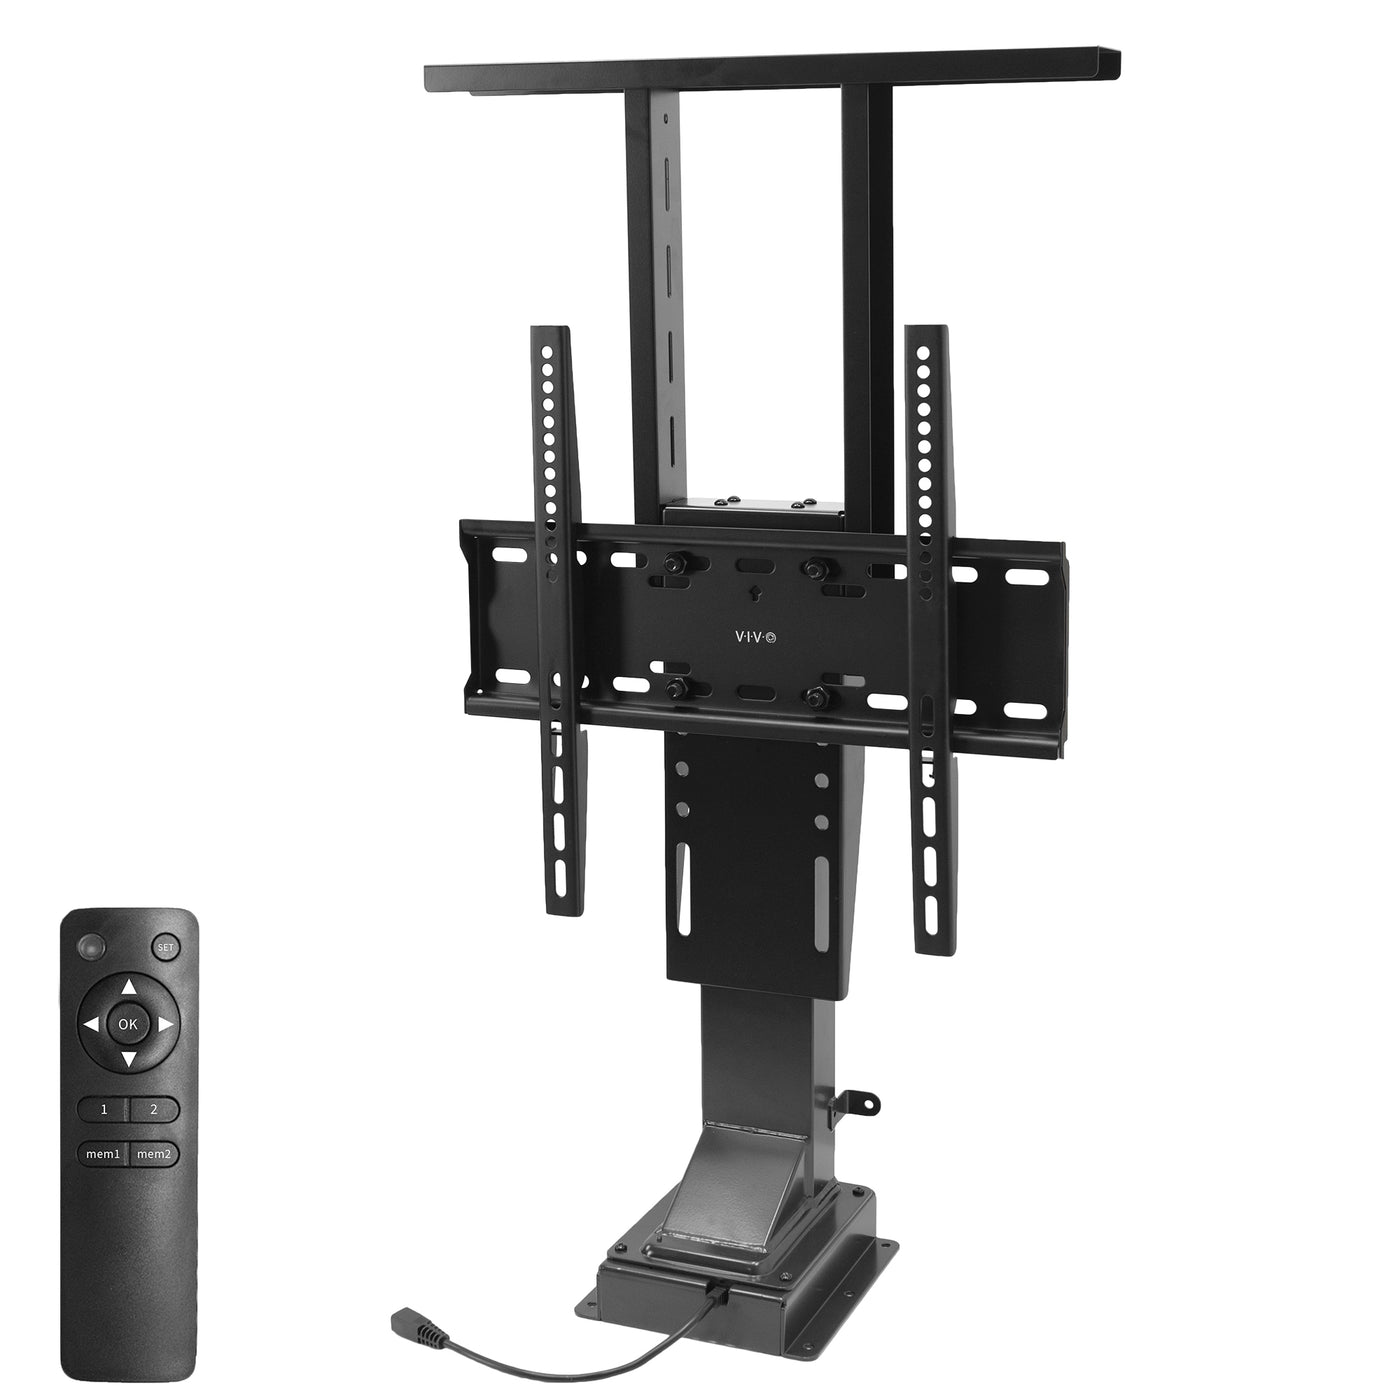 Compact motorized TV mount from VIVO.